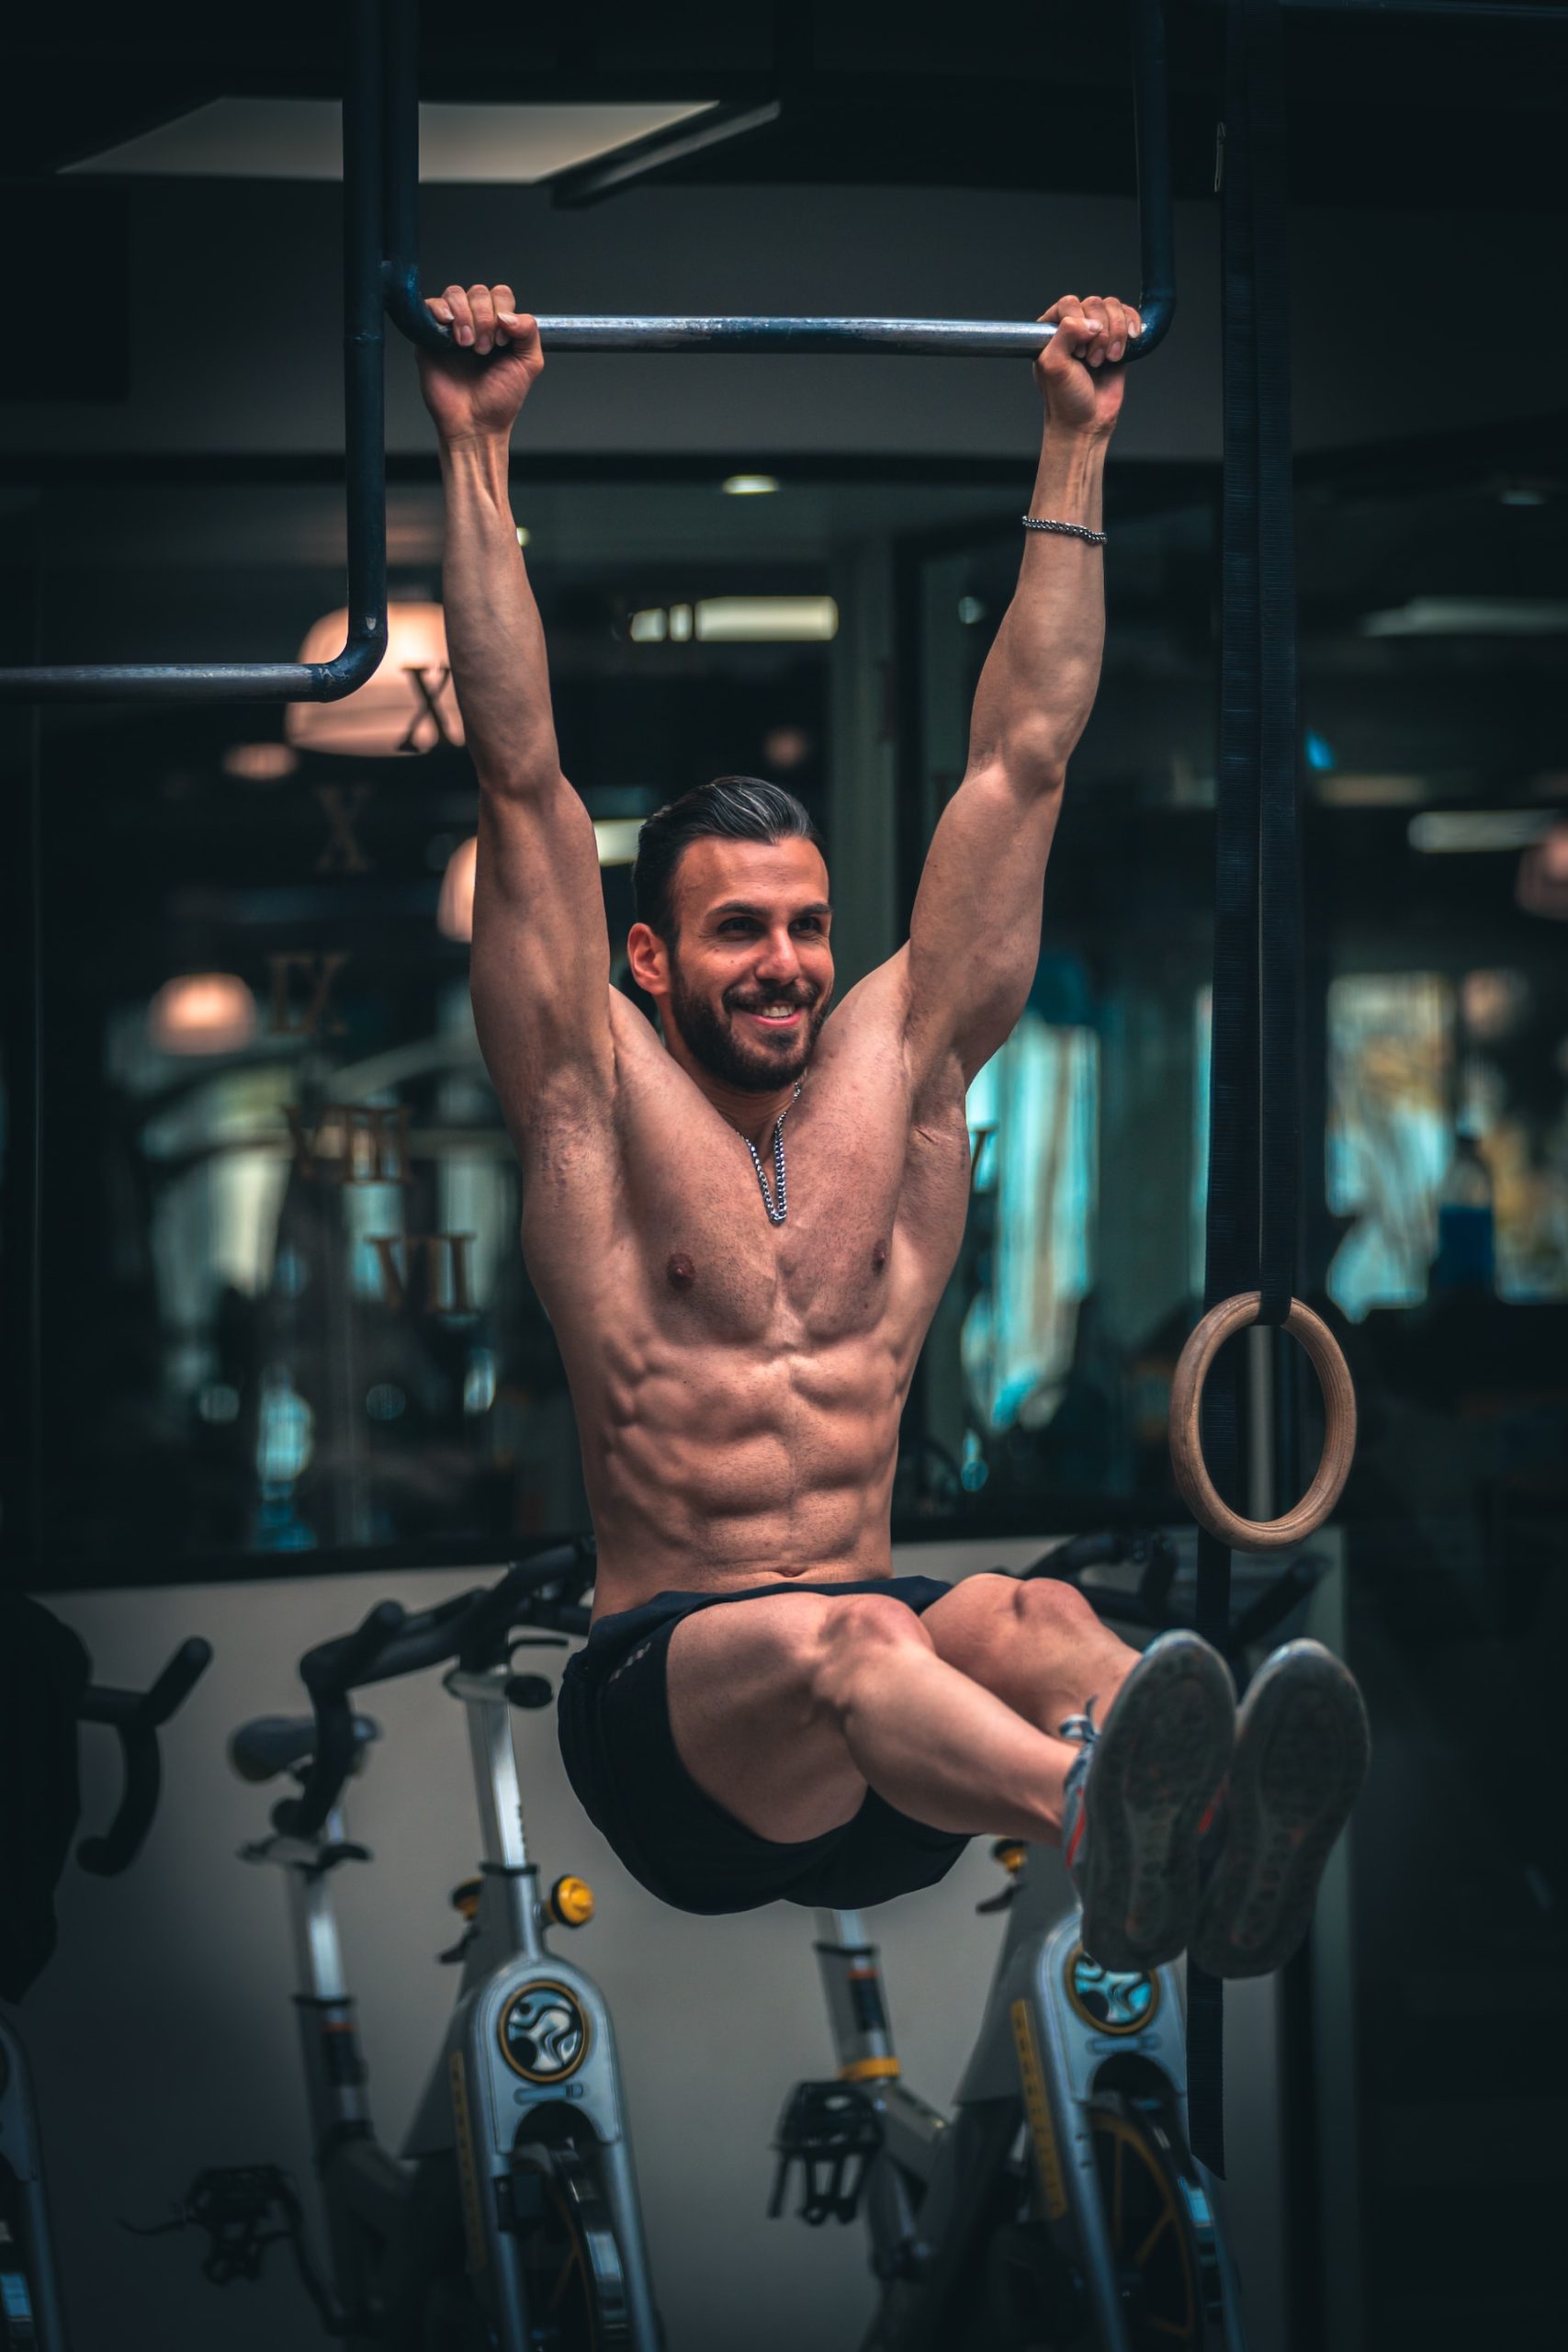 Man performing a hanging leg raise as part of his pilates routine